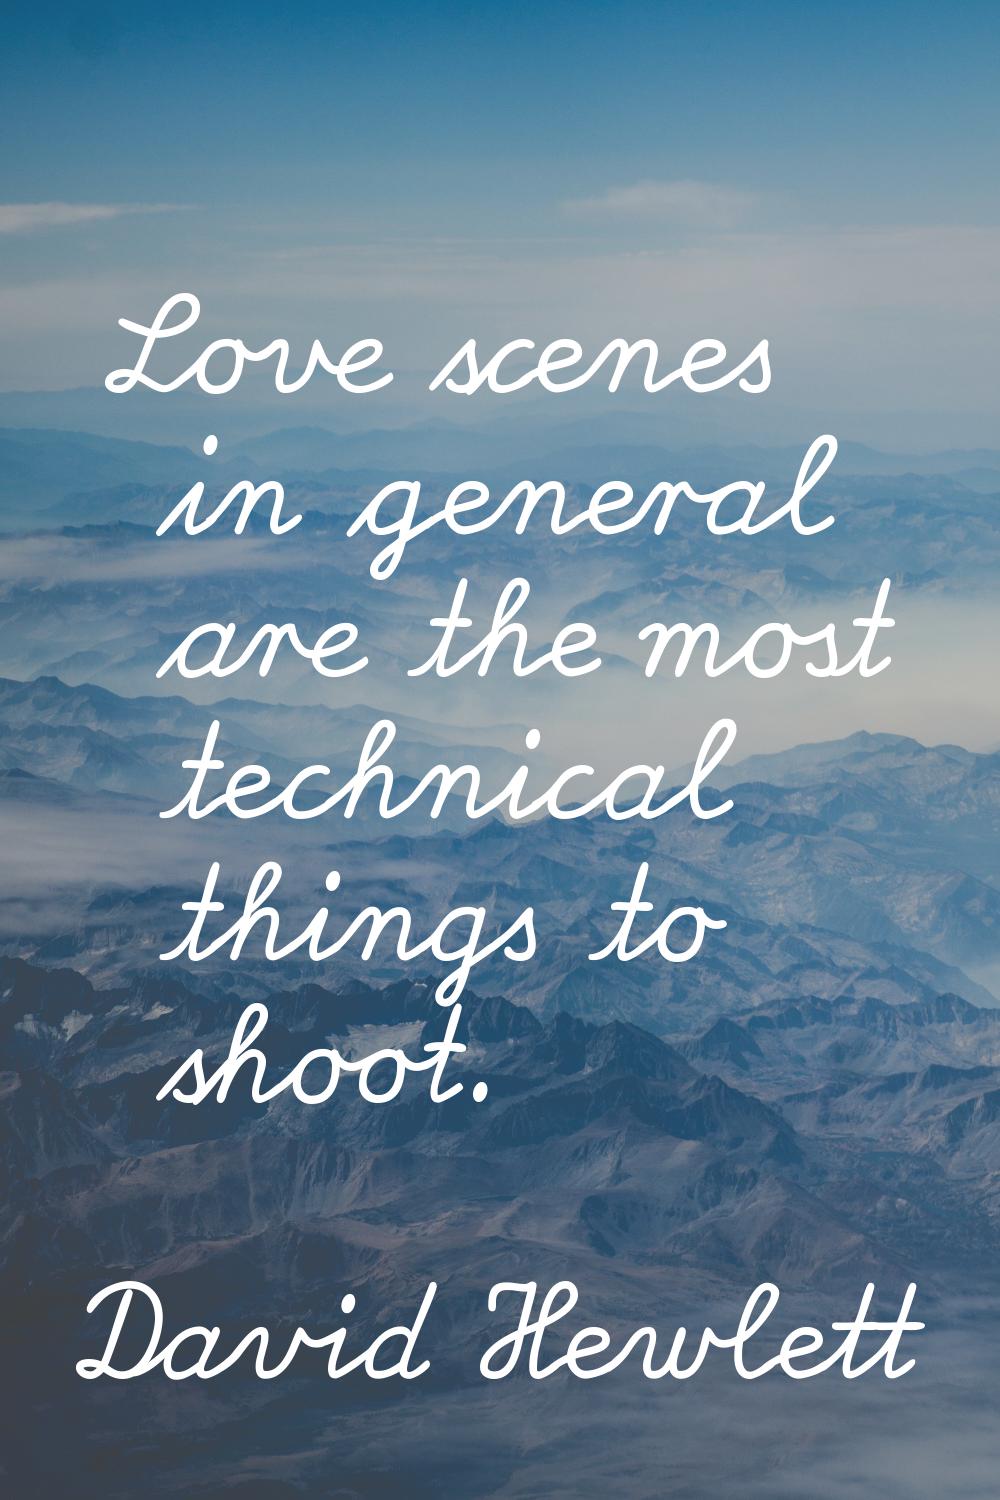 Love scenes in general are the most technical things to shoot.